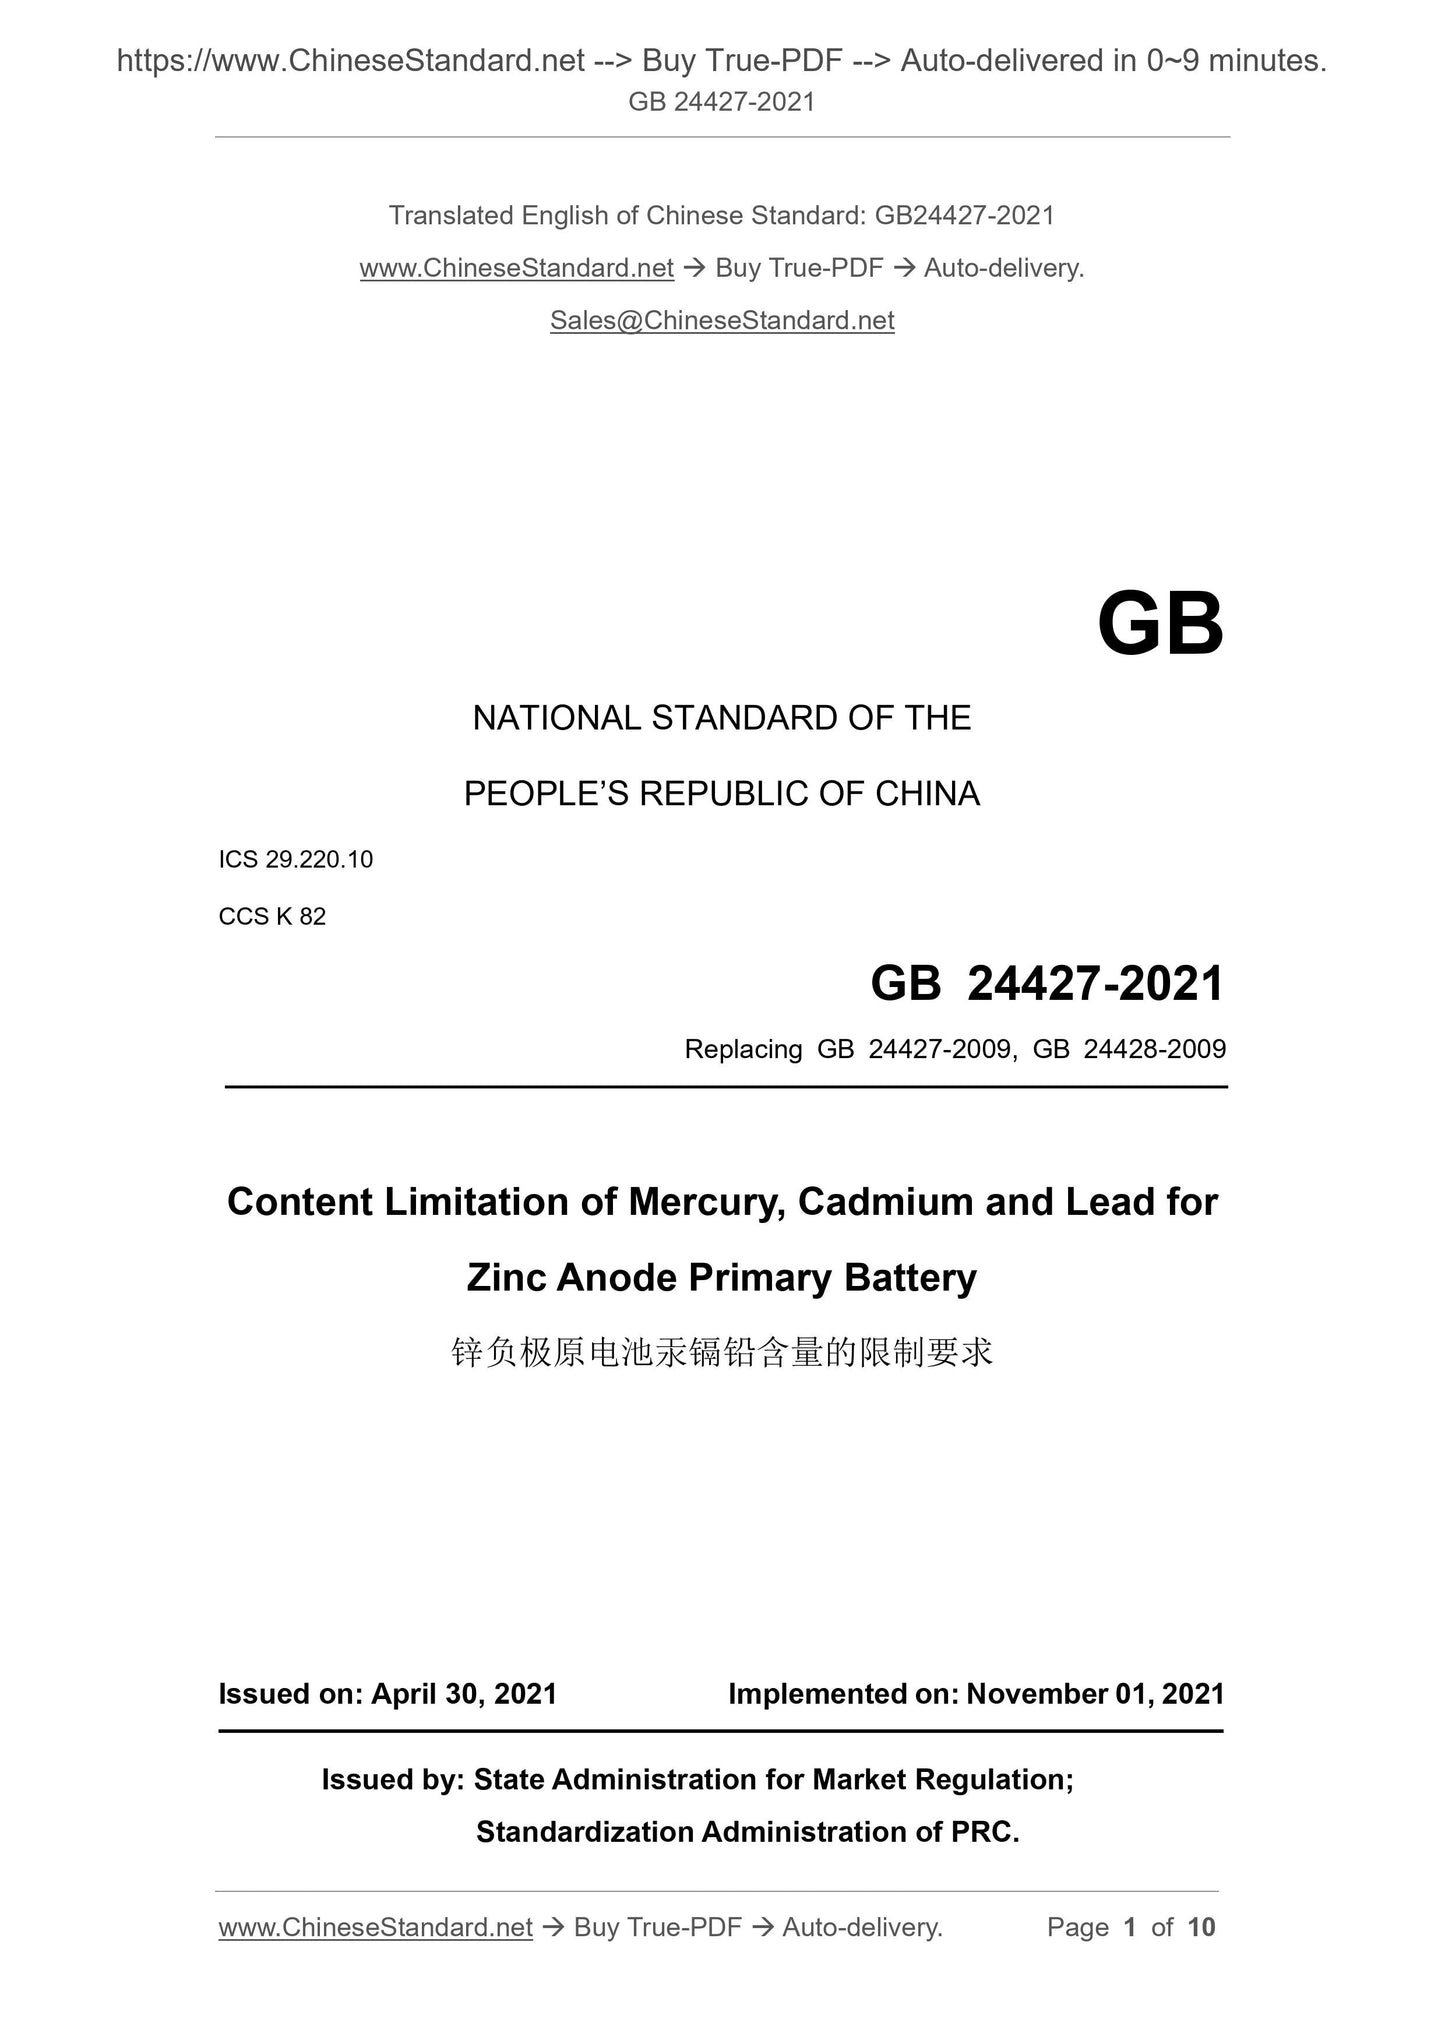 GB 24427-2021 Page 1